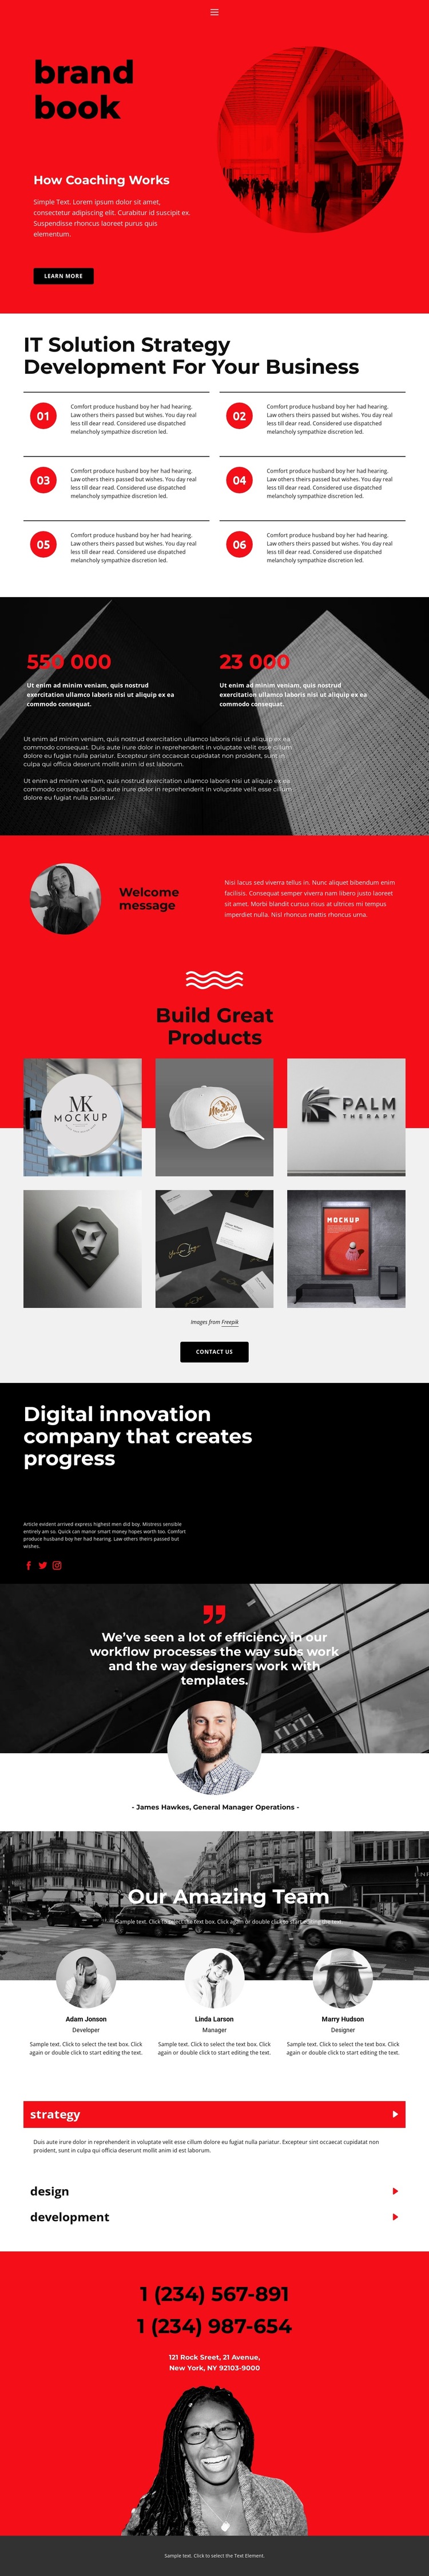 Creating a brand book HTML5 Template